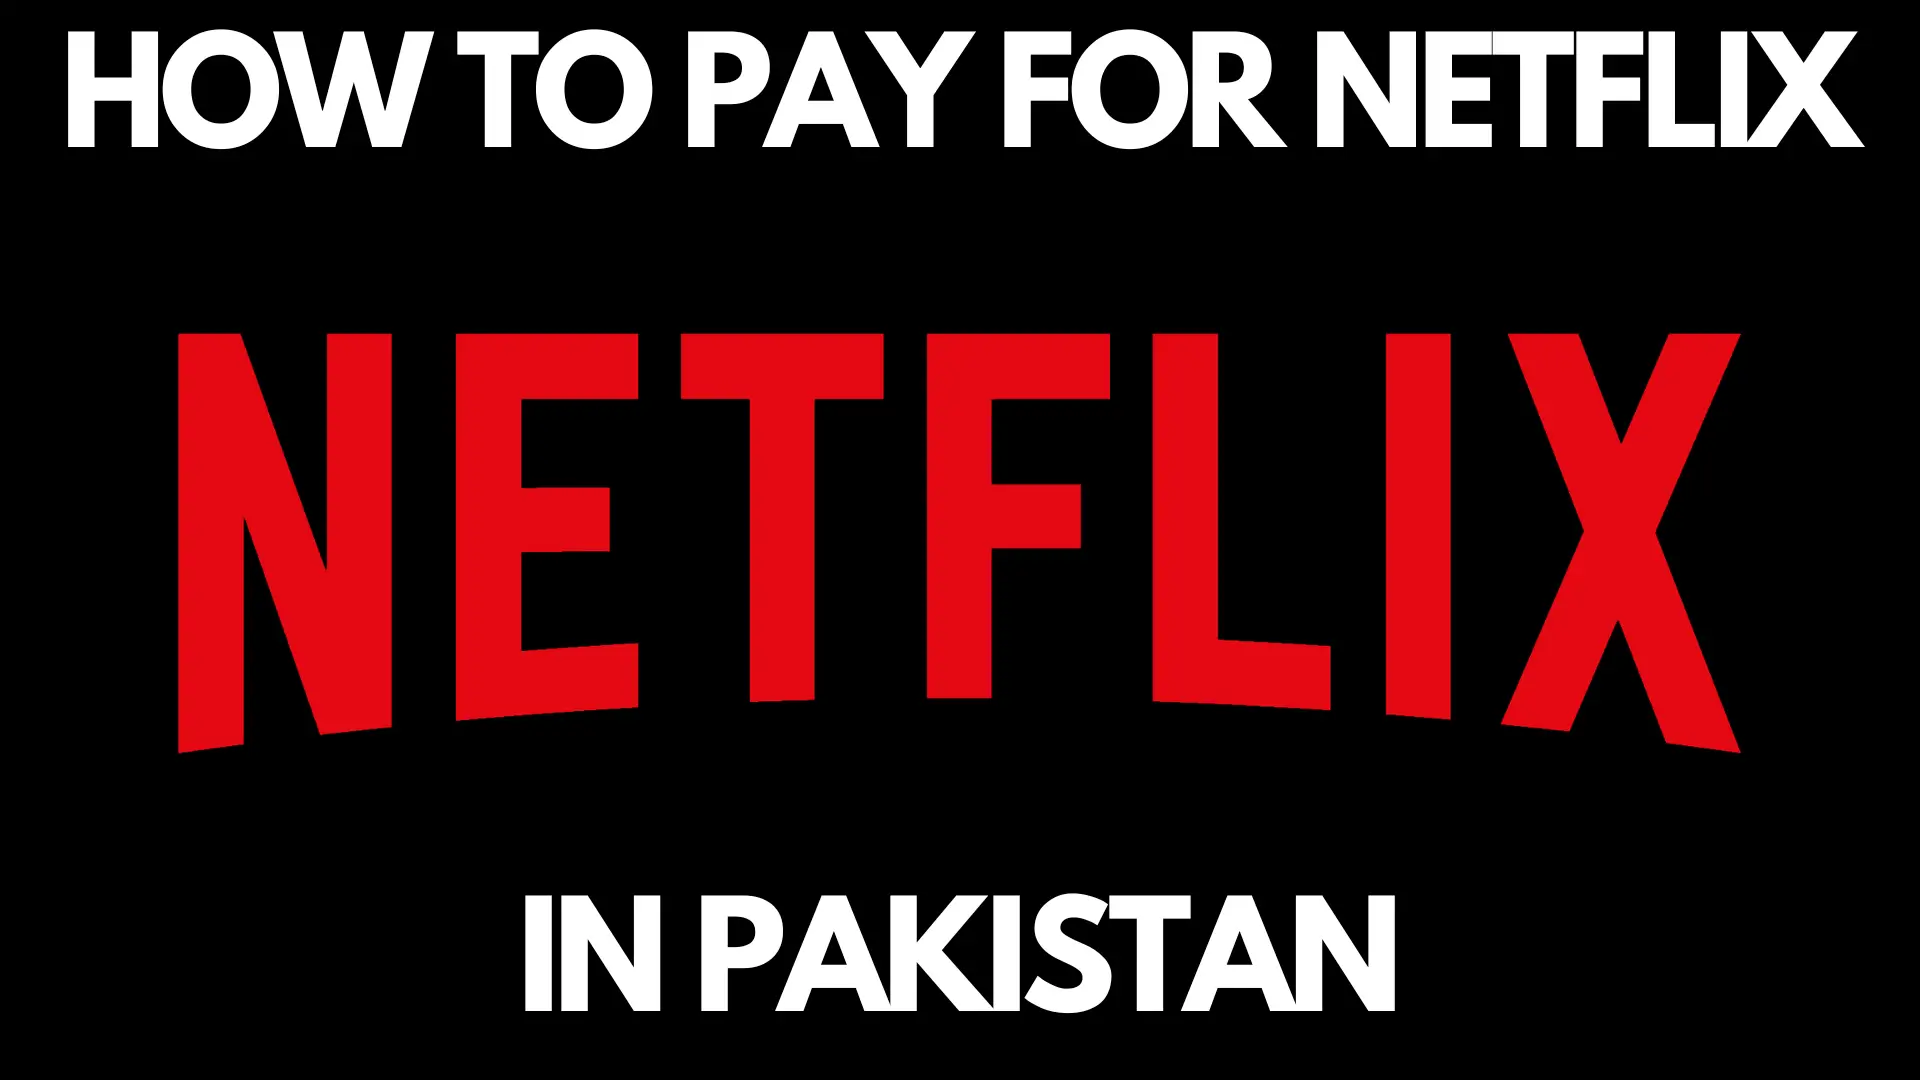 HOW TO PAY FOR NETFLIX IN PAKISTAN